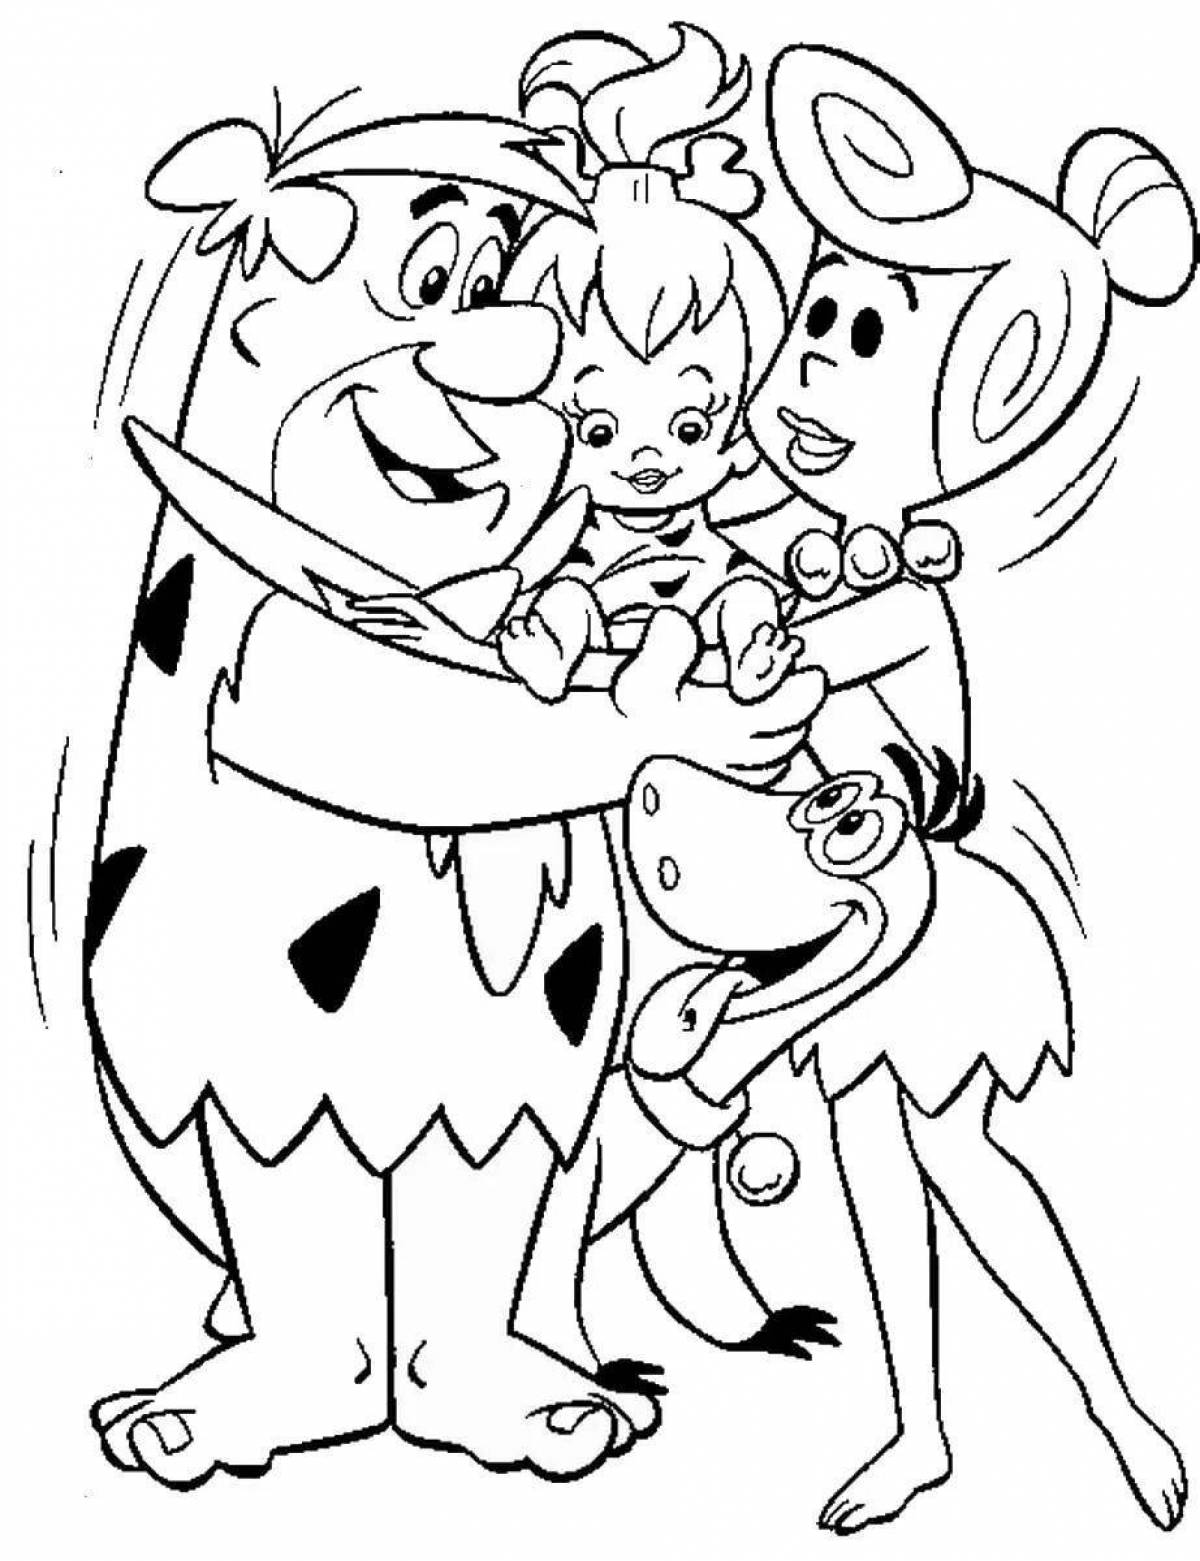 Fred flintstone's adorable coloring book